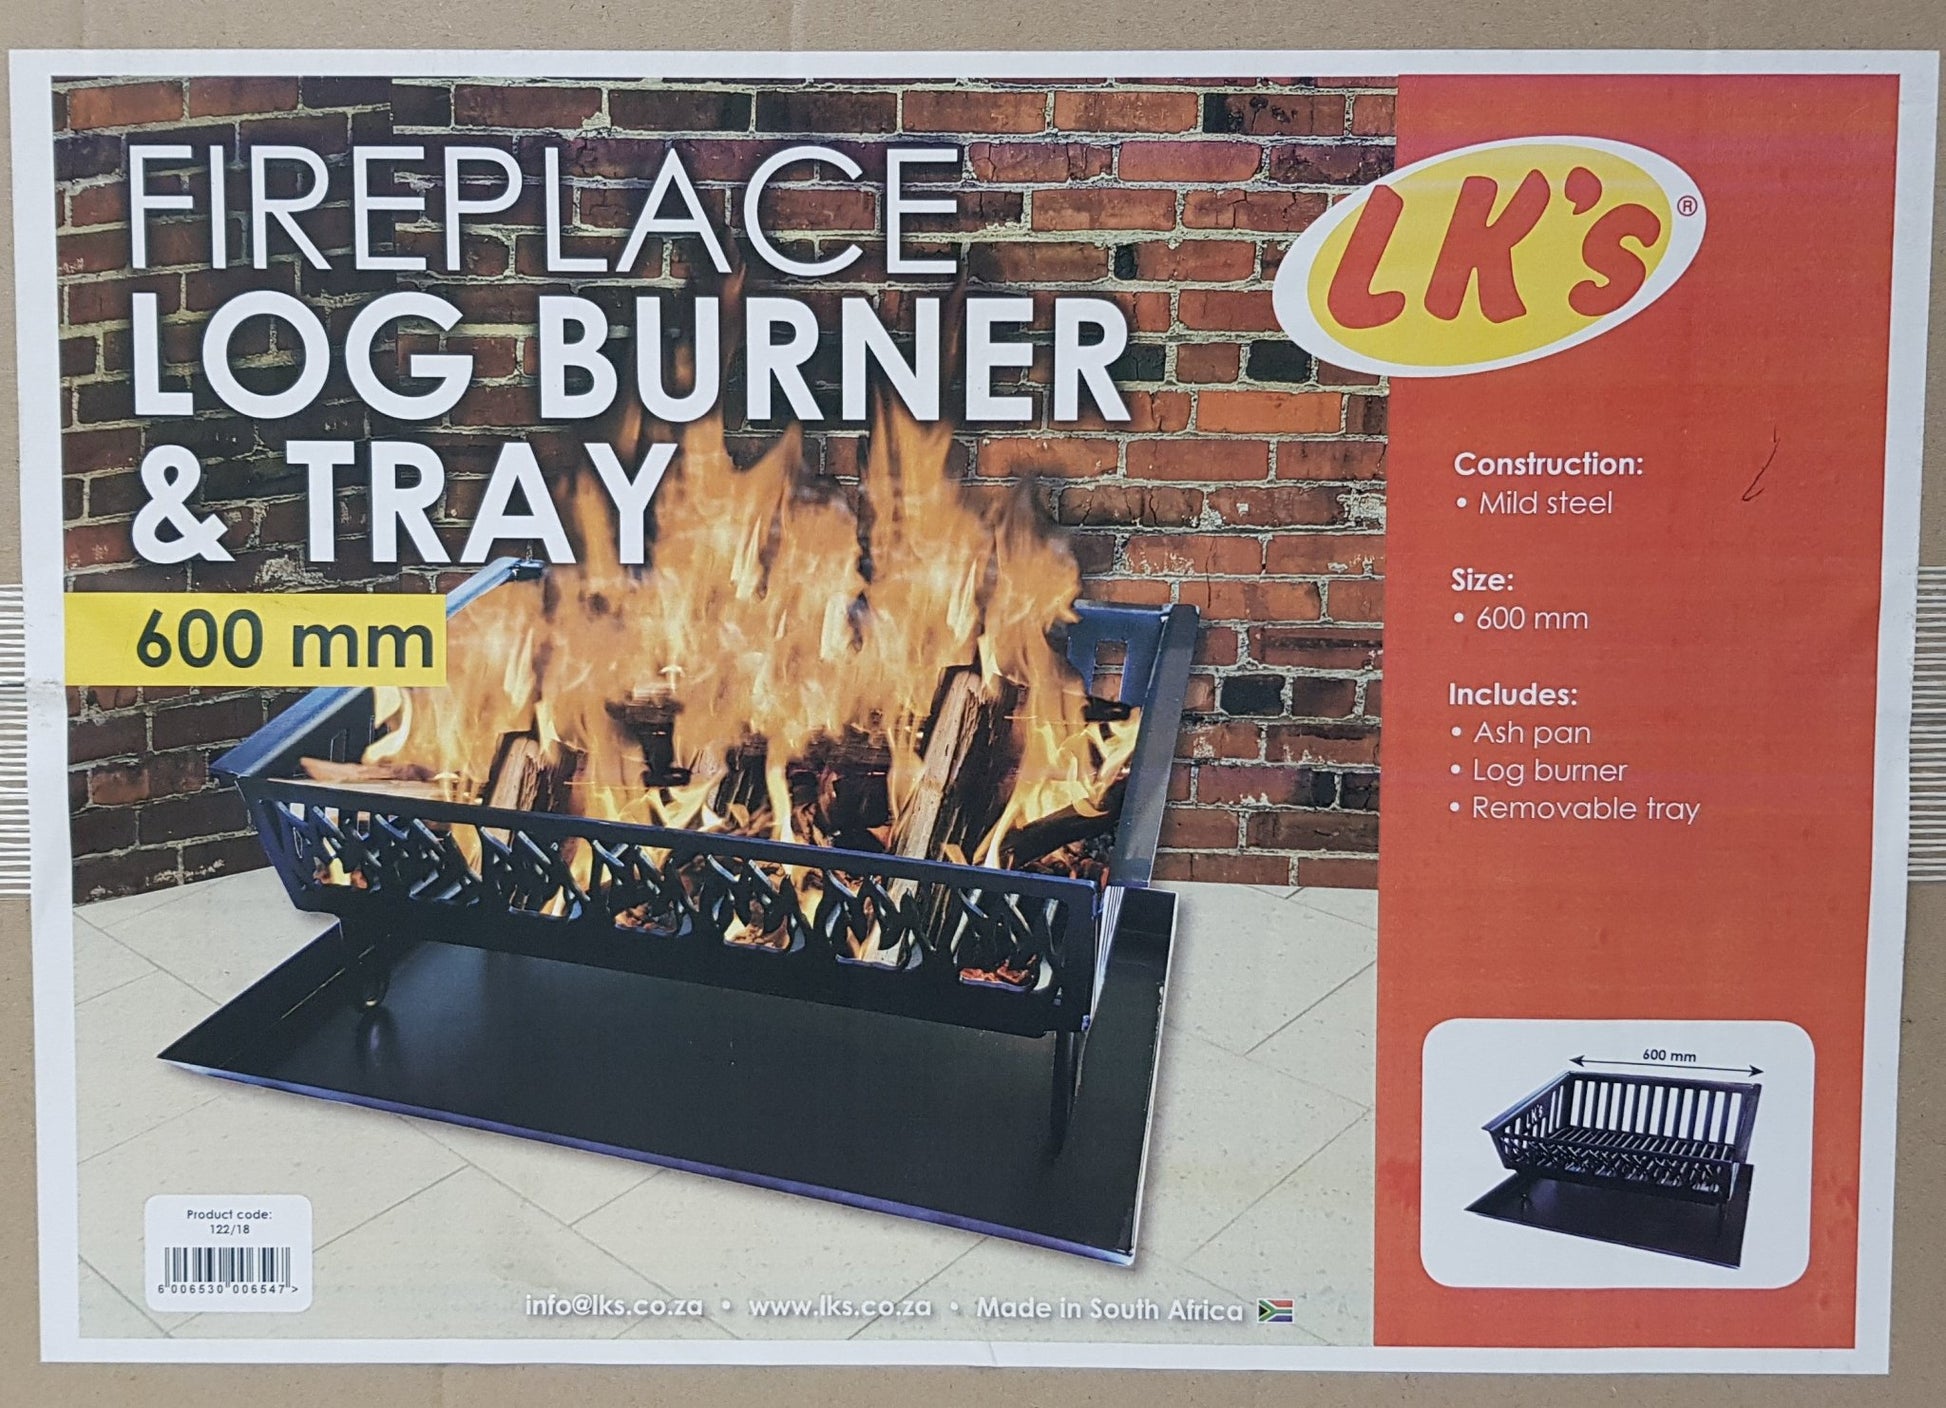 Quality Fireplace Log Burner and Tray - 600mm - Lifespace